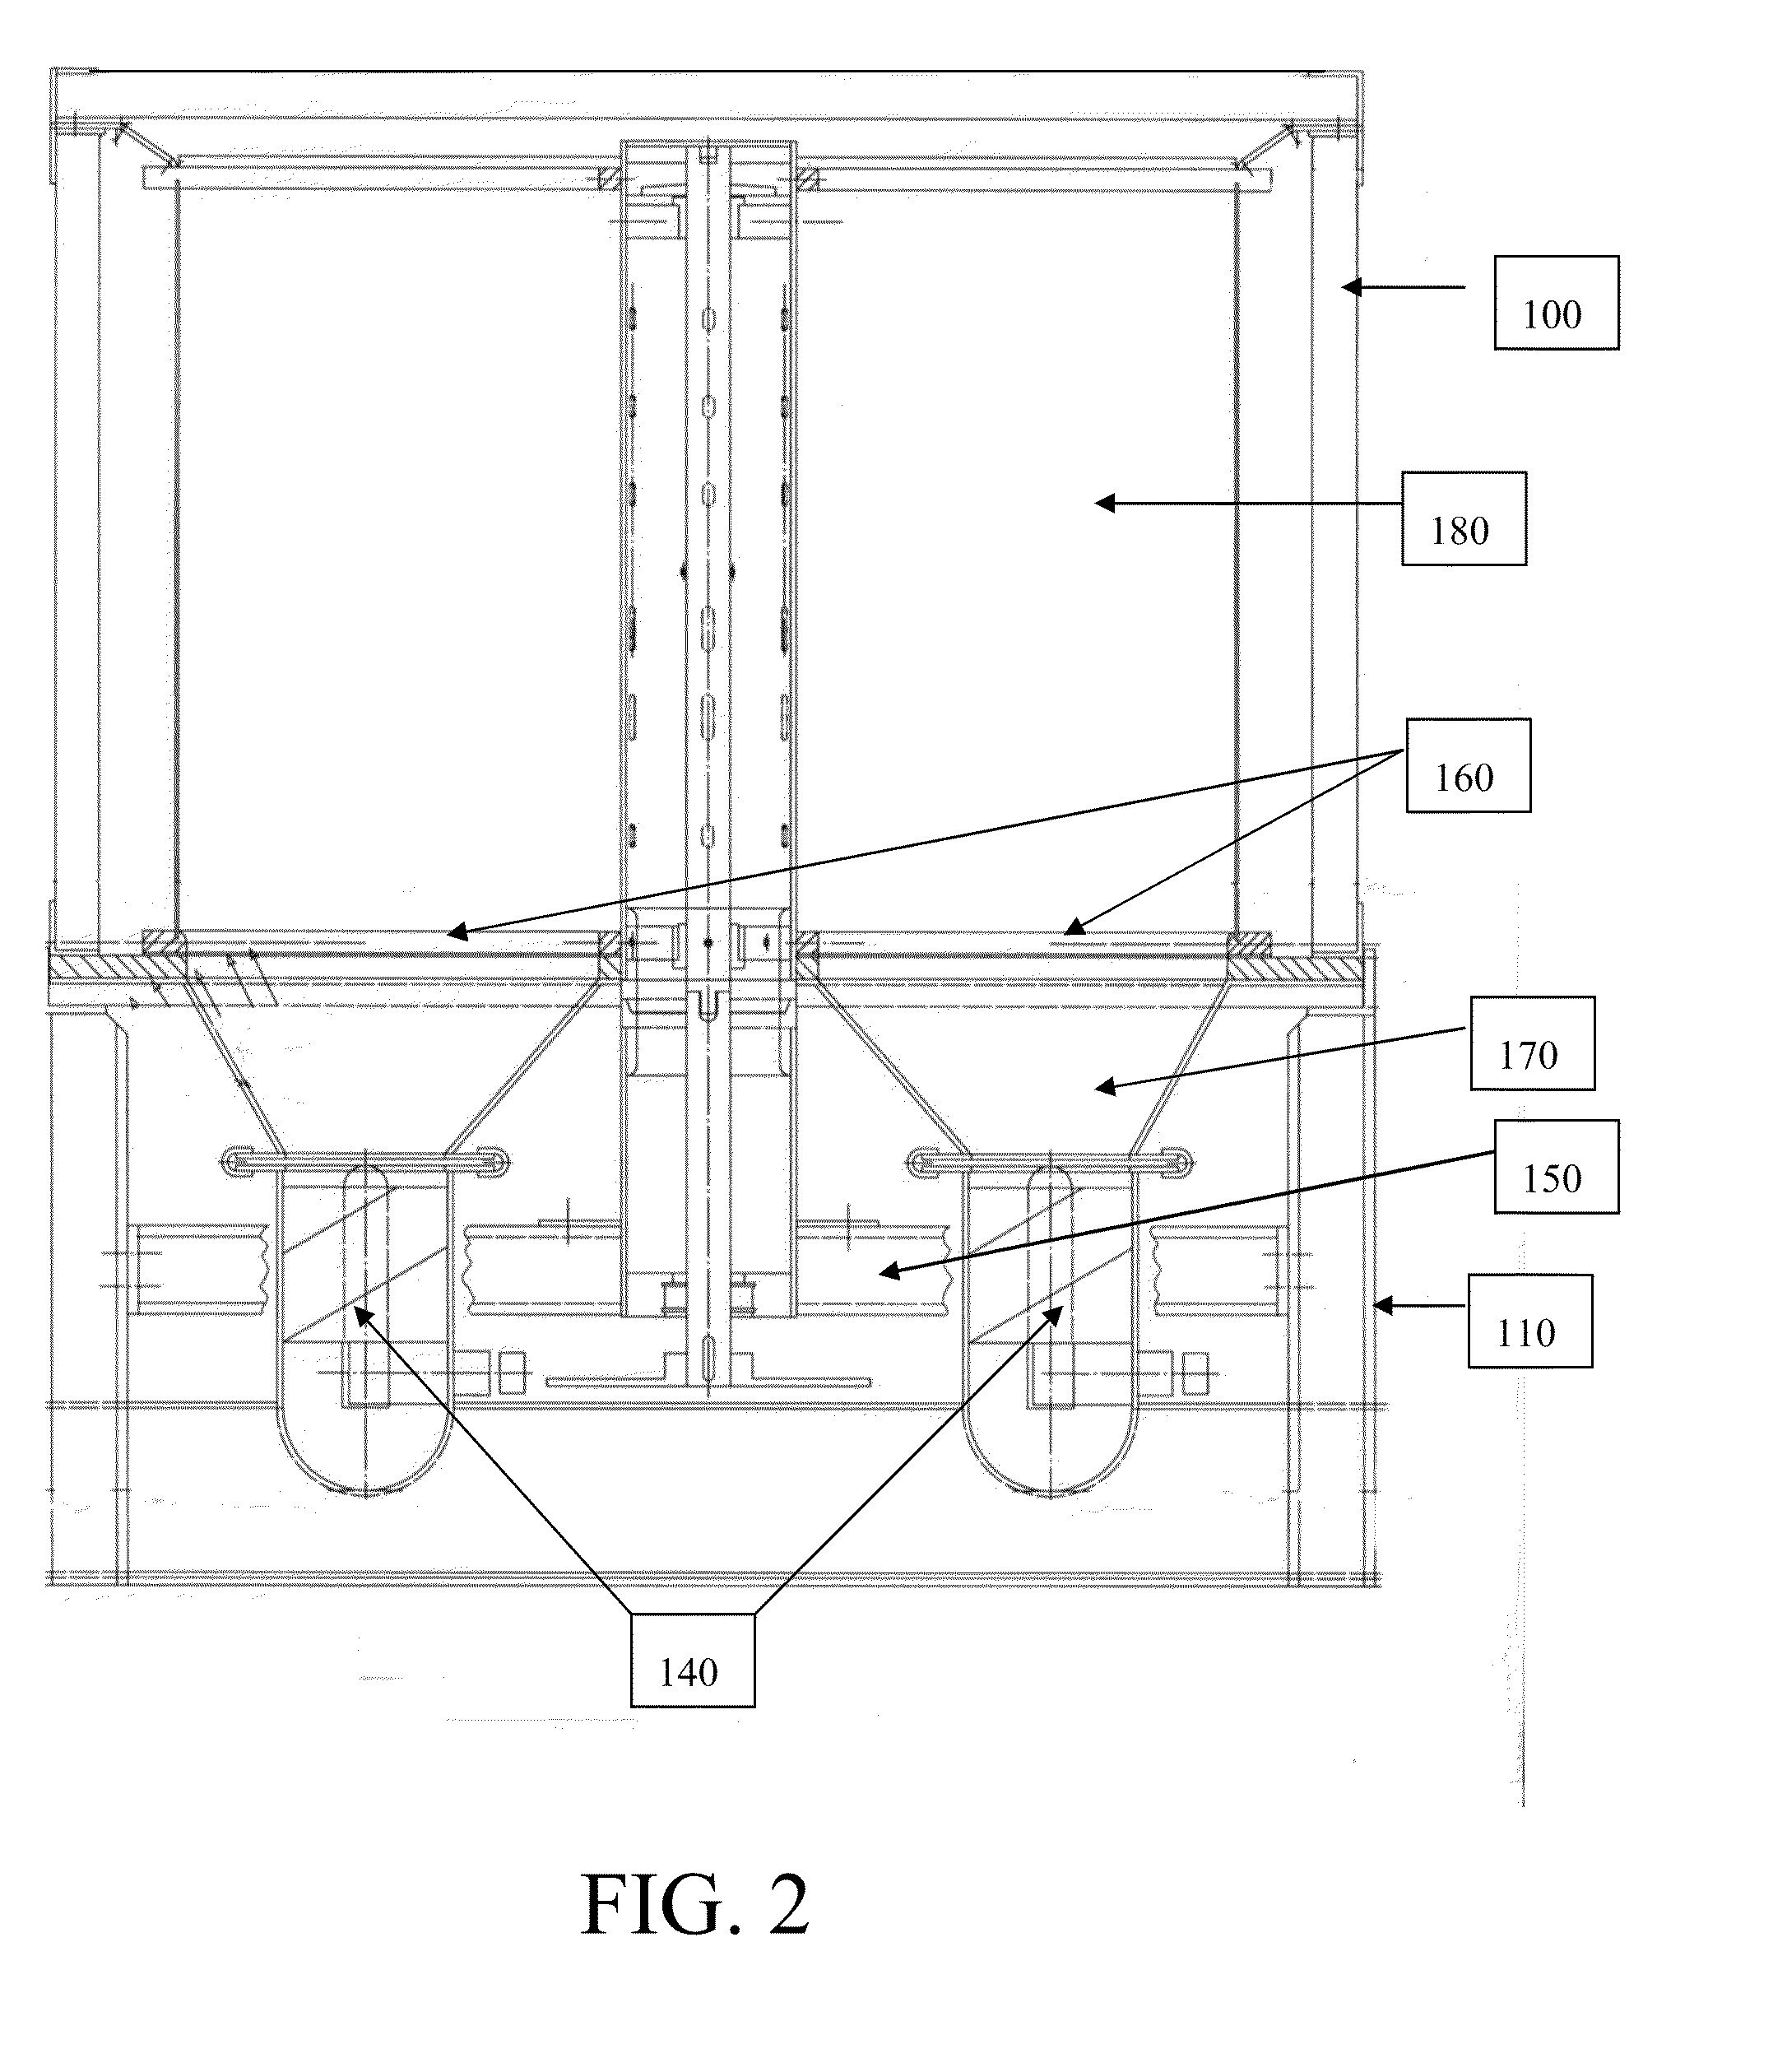 System and method for release and dispersion of flies or other biological control